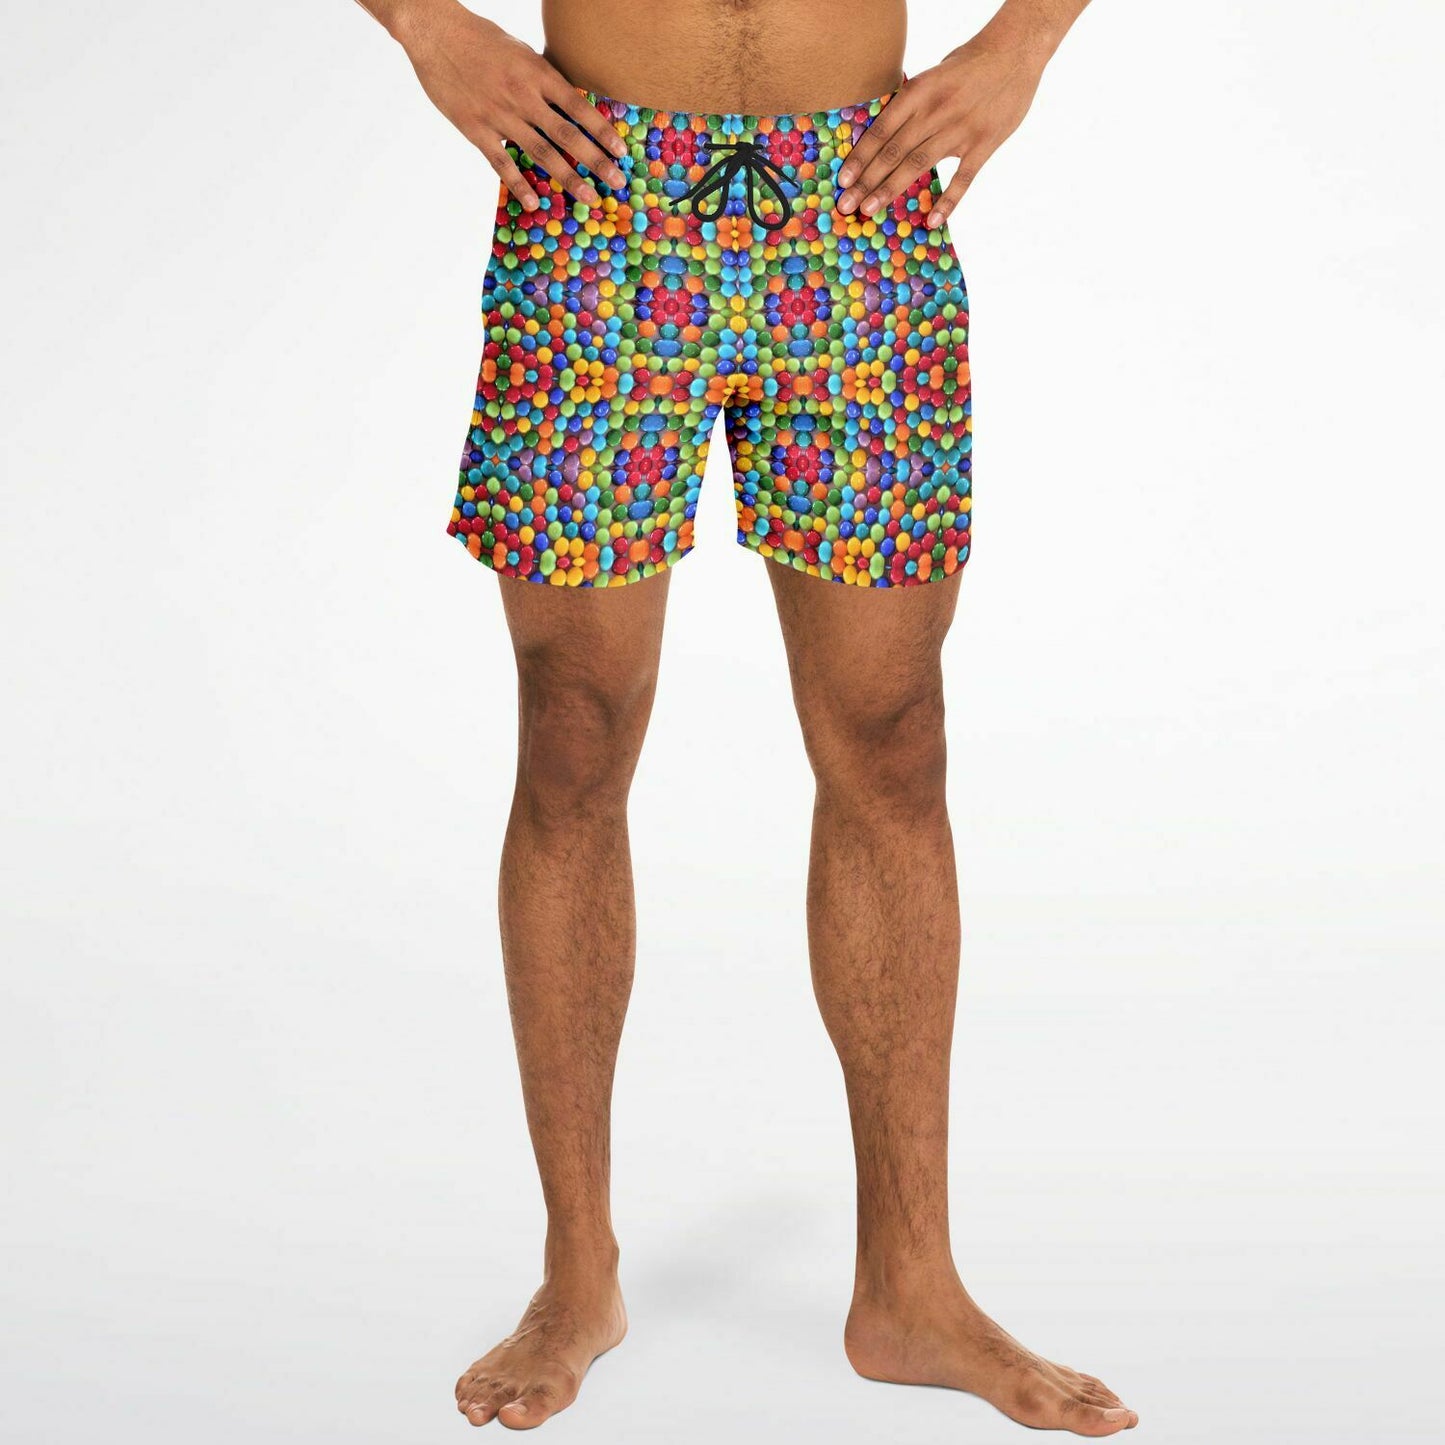 Front full view mens swim trunks with colorful rainbow gumball pattern